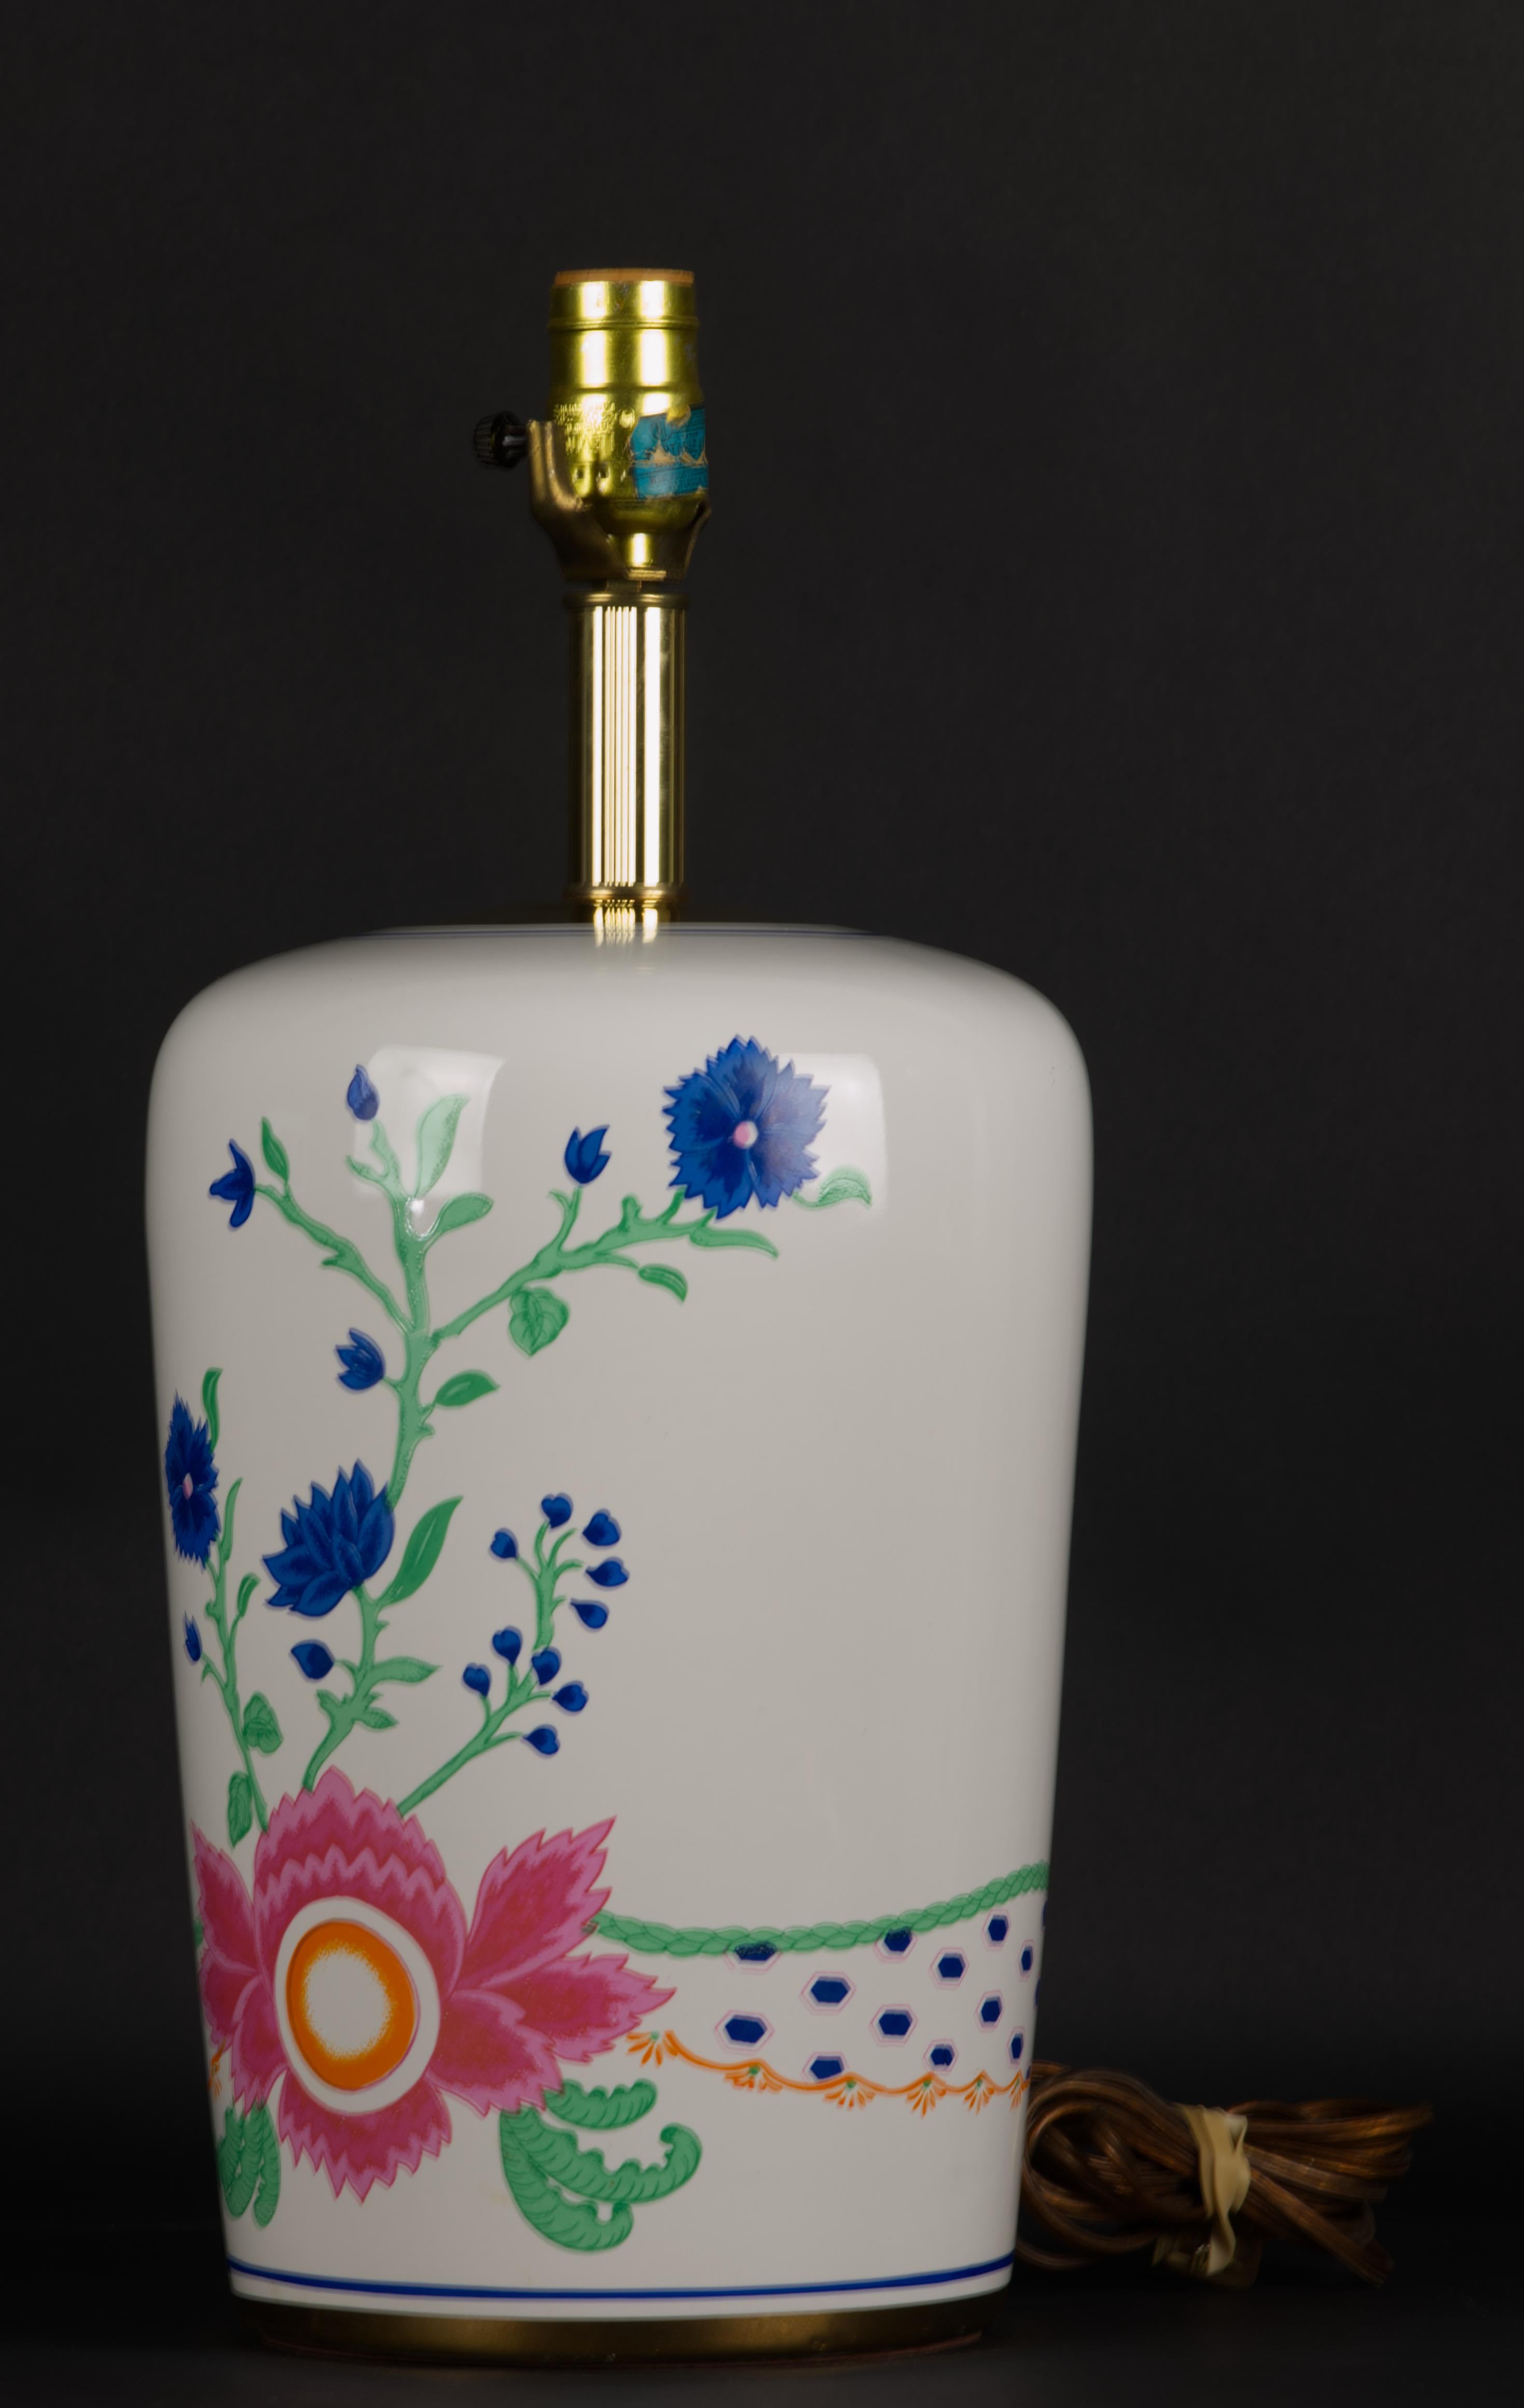 Vintage 1970s Westwood Industries Lamp company table lamp is decorated with abstract design of pink and blue flowers and green leaves on white porcelain body; bigger flower composition adorns the front of the lamp, and the back is done with smaller